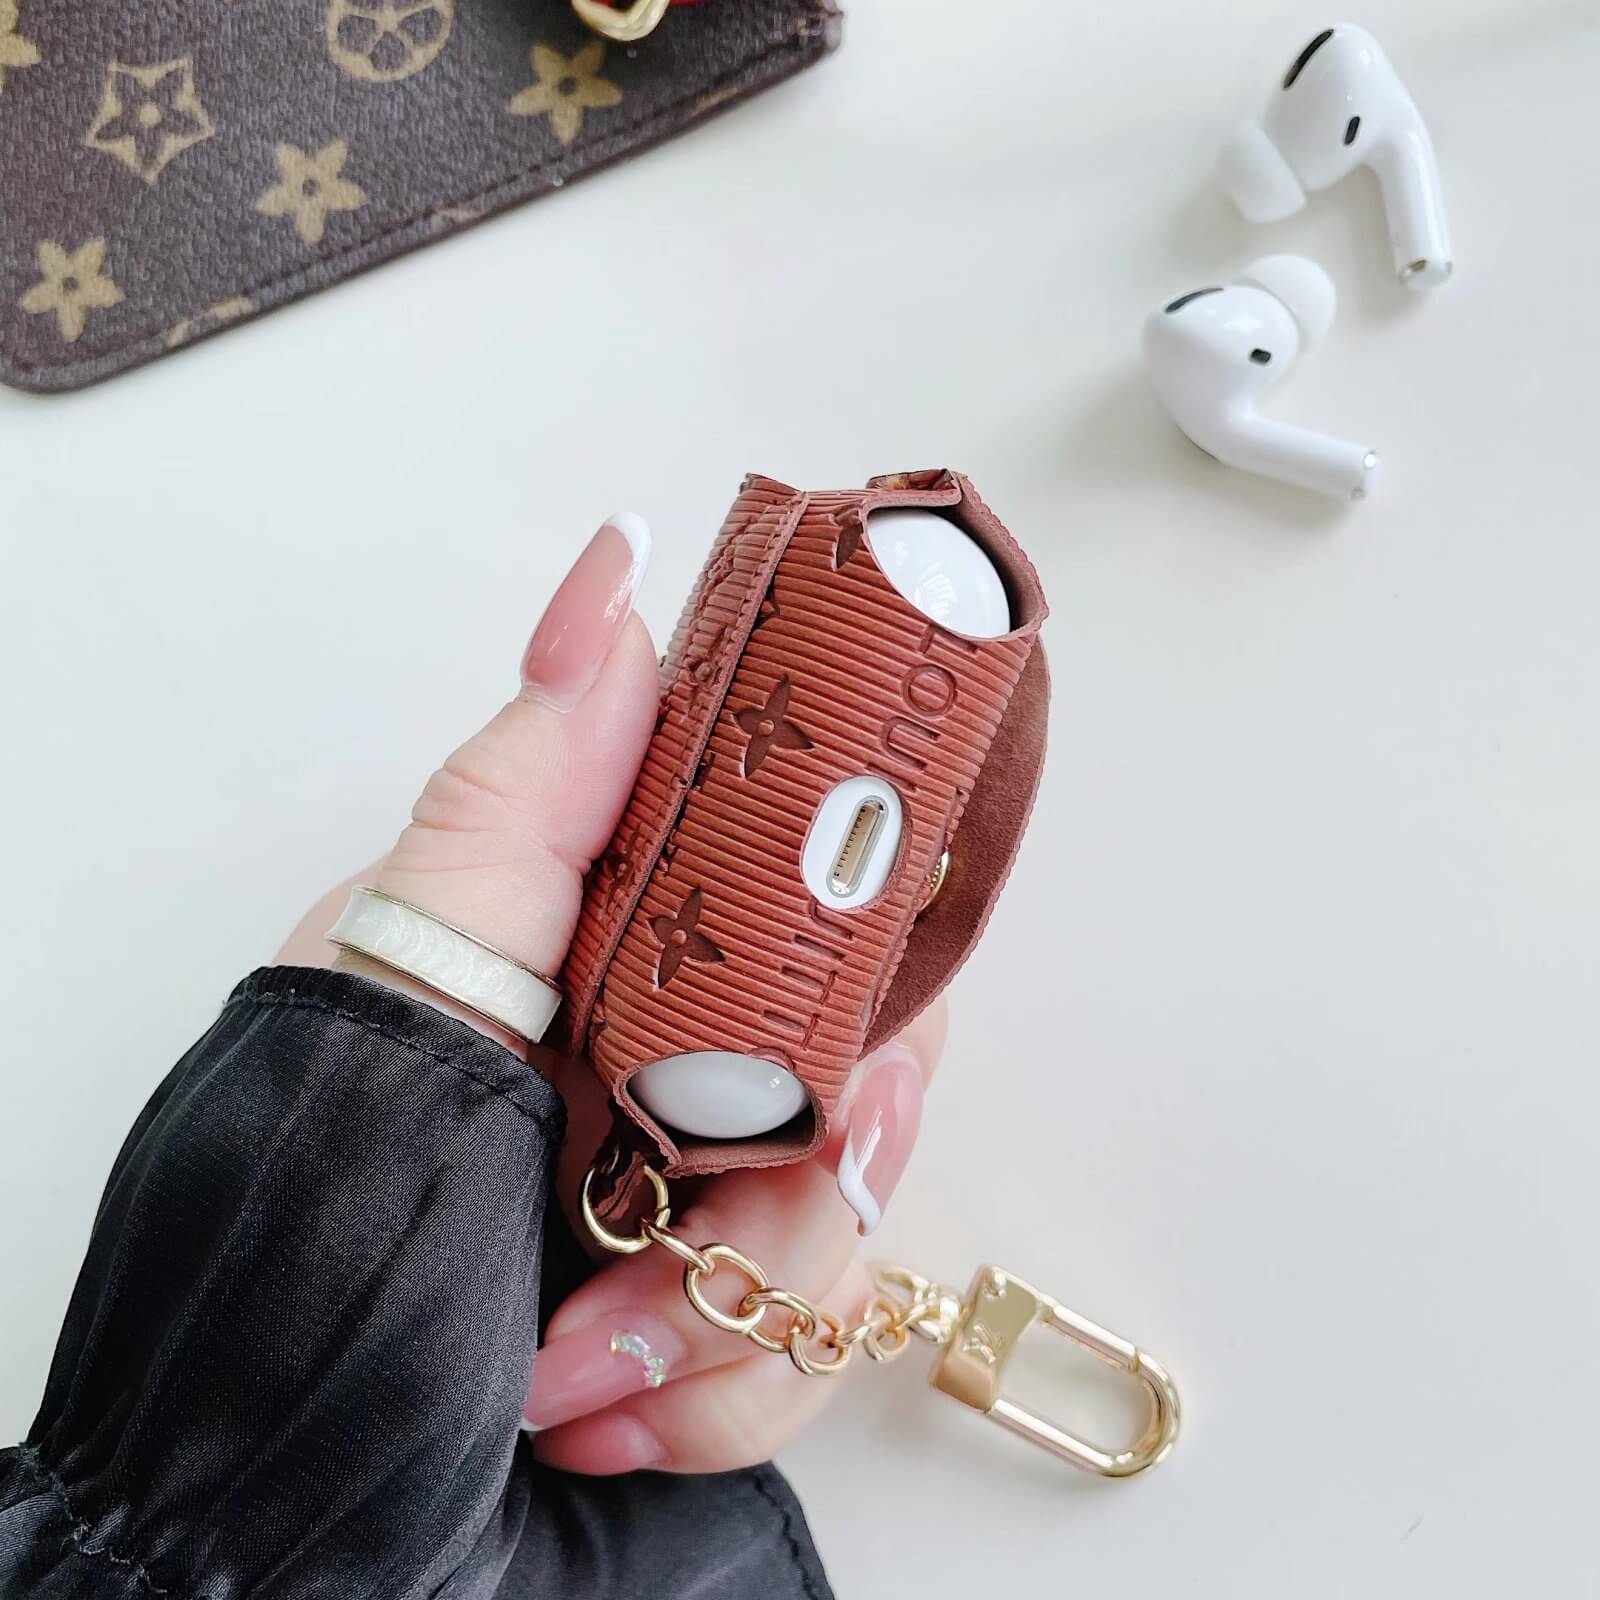 Louis Vuitton Protection Cover Case For Apple Airpods Pro Airpods 1 2 -6